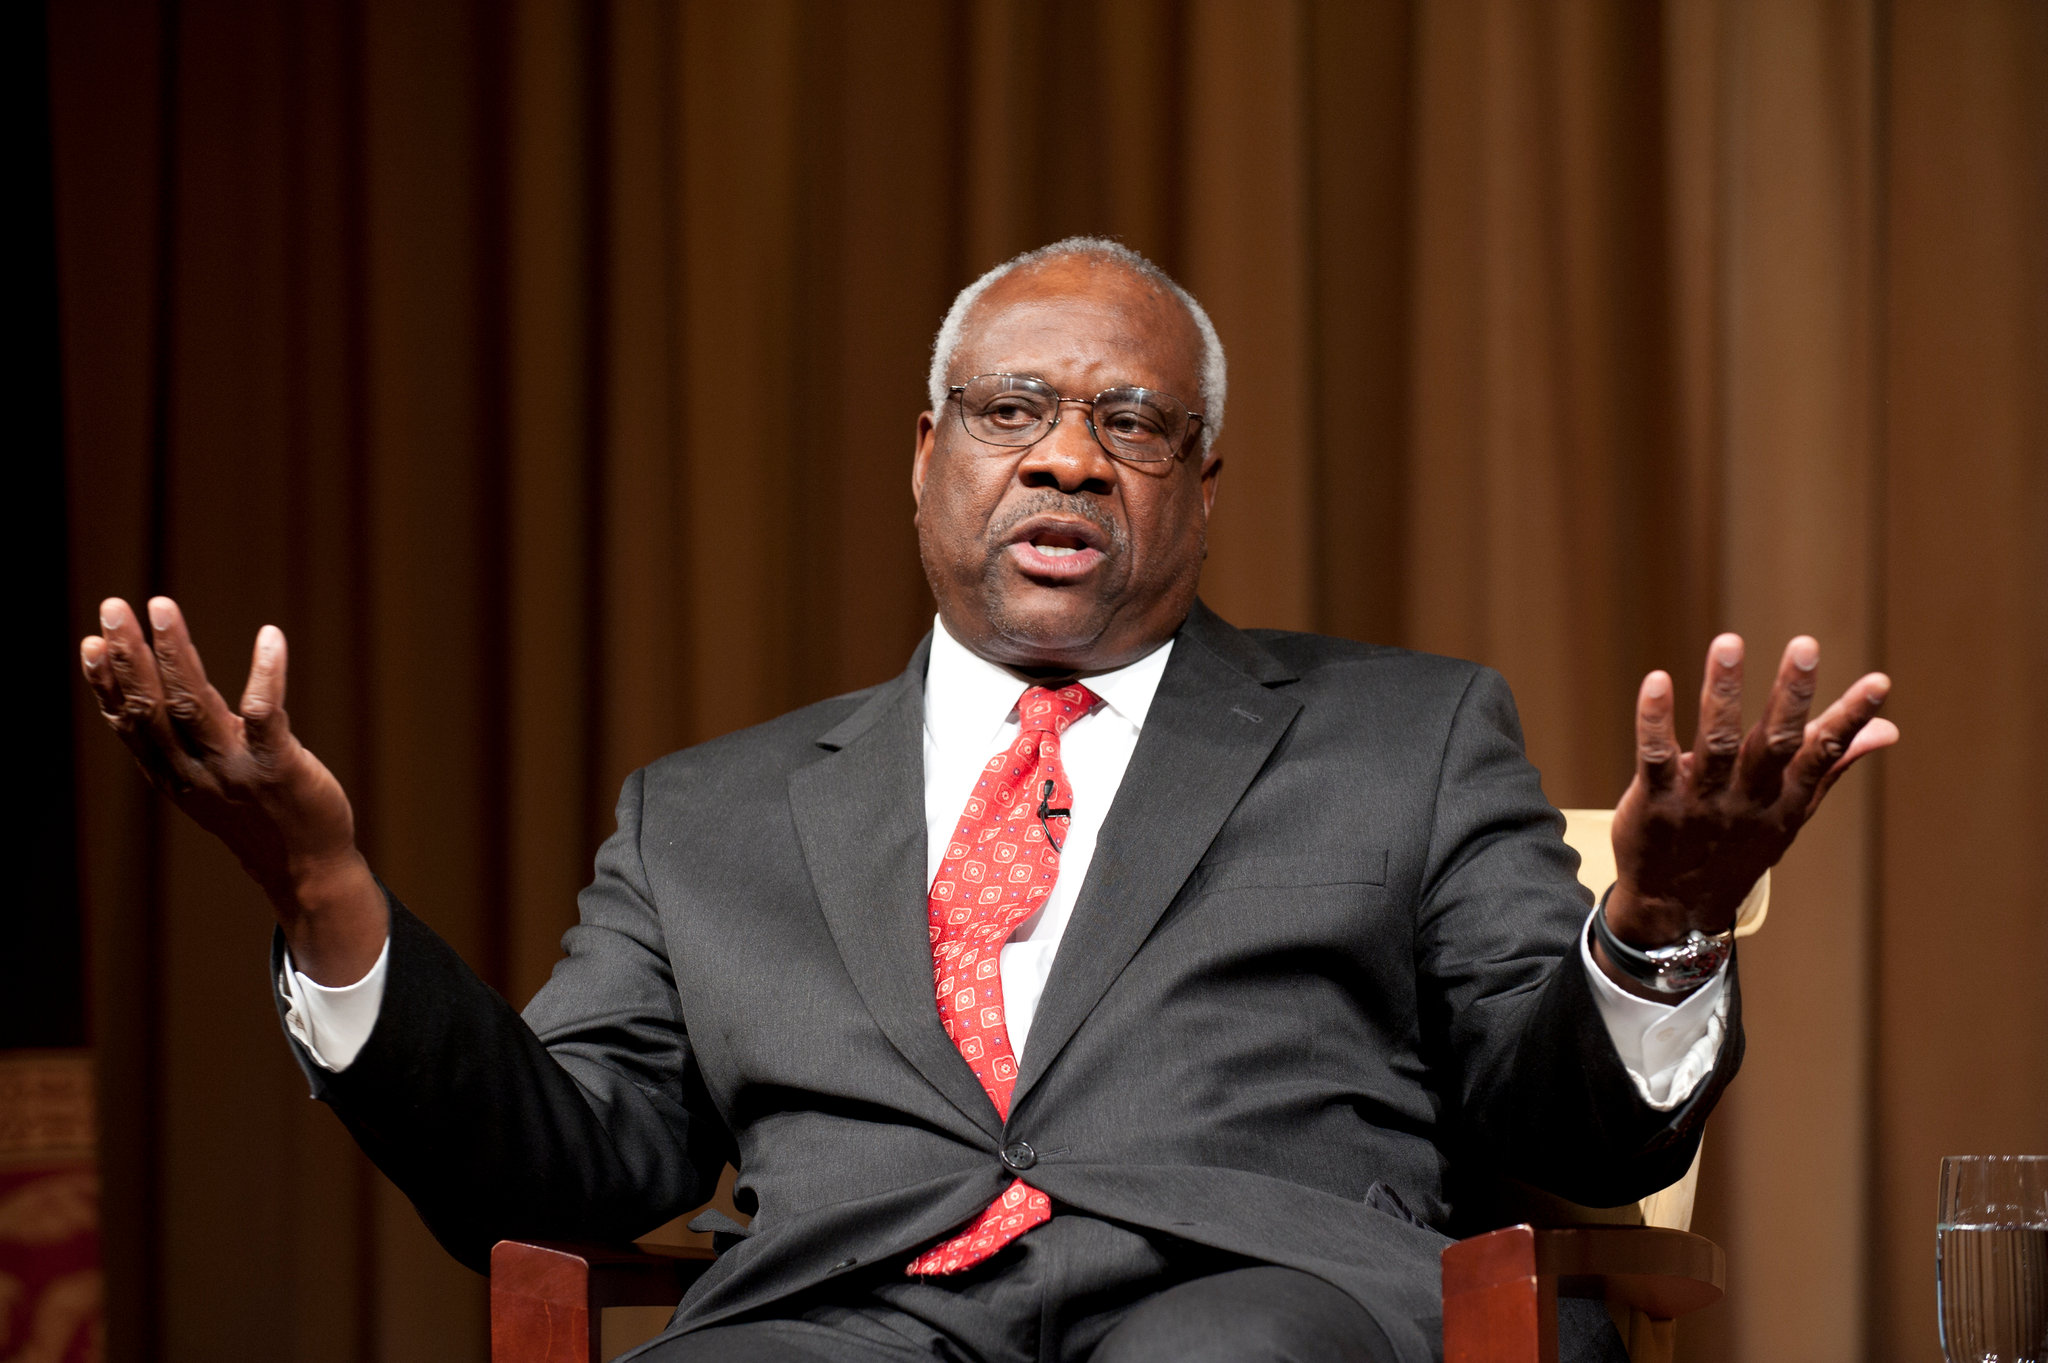 Clarence Thomas faces new financial scrutiny